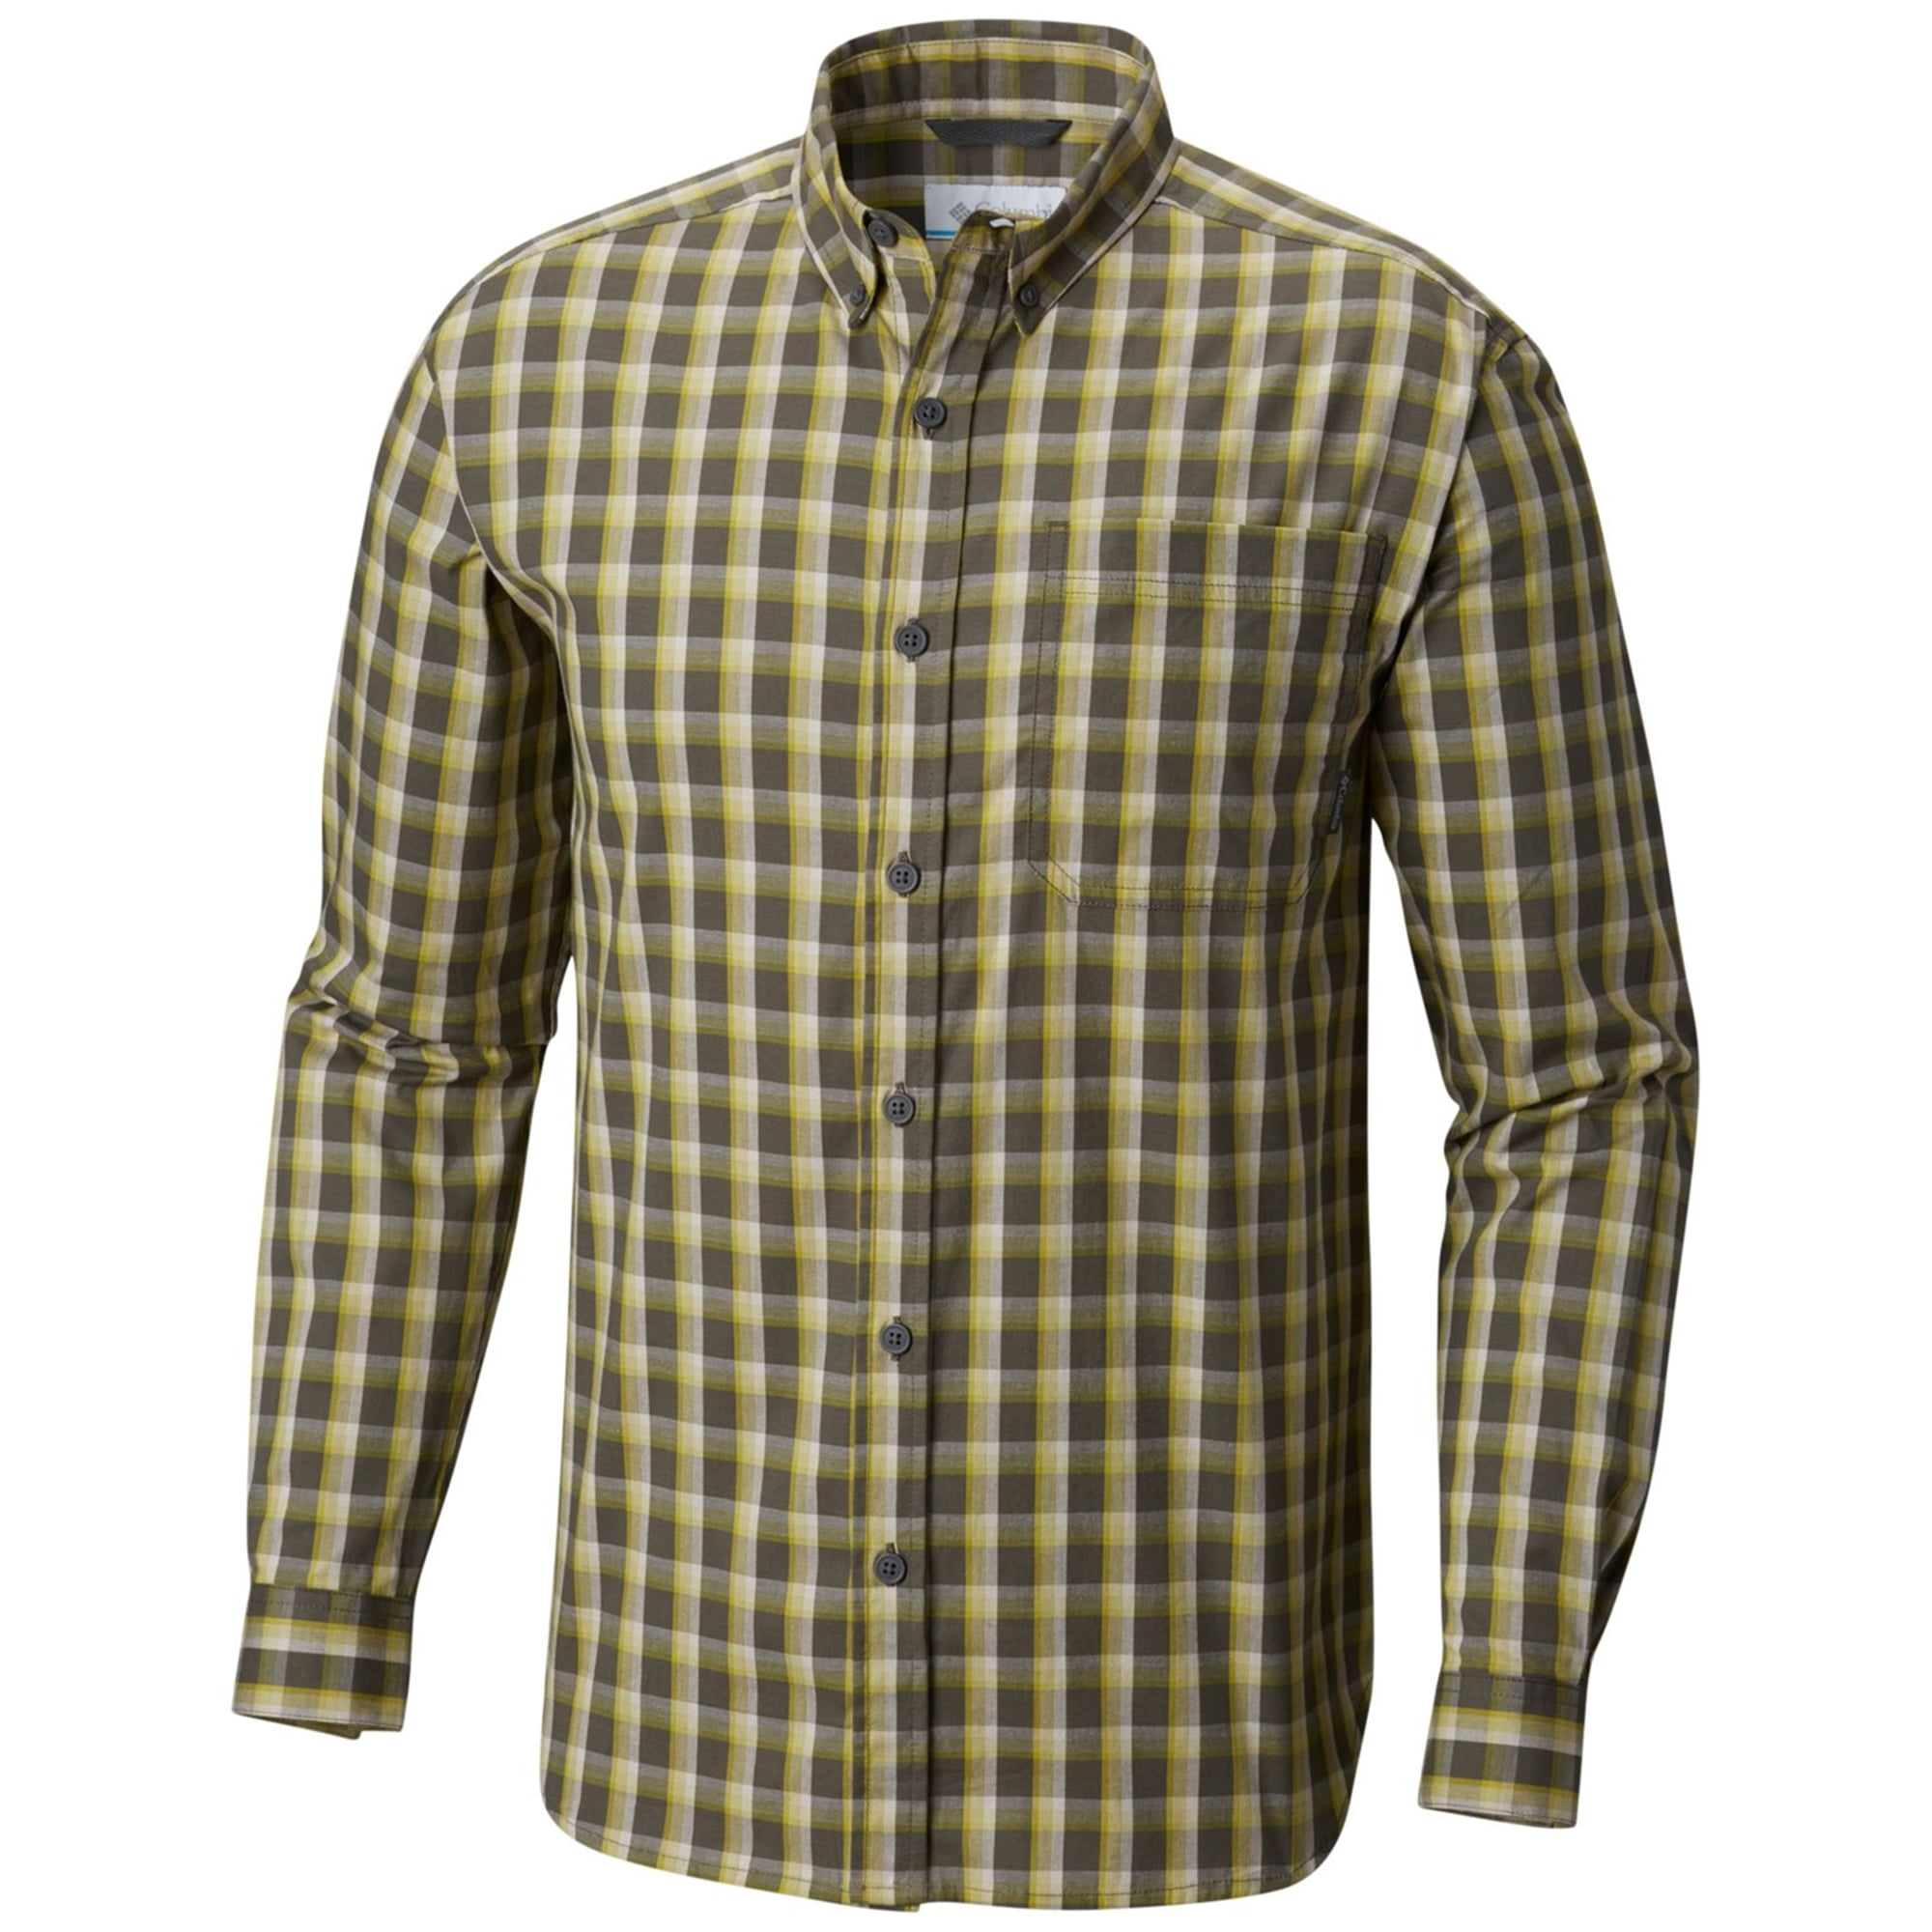 Buy > columbia cotton shirts > in stock